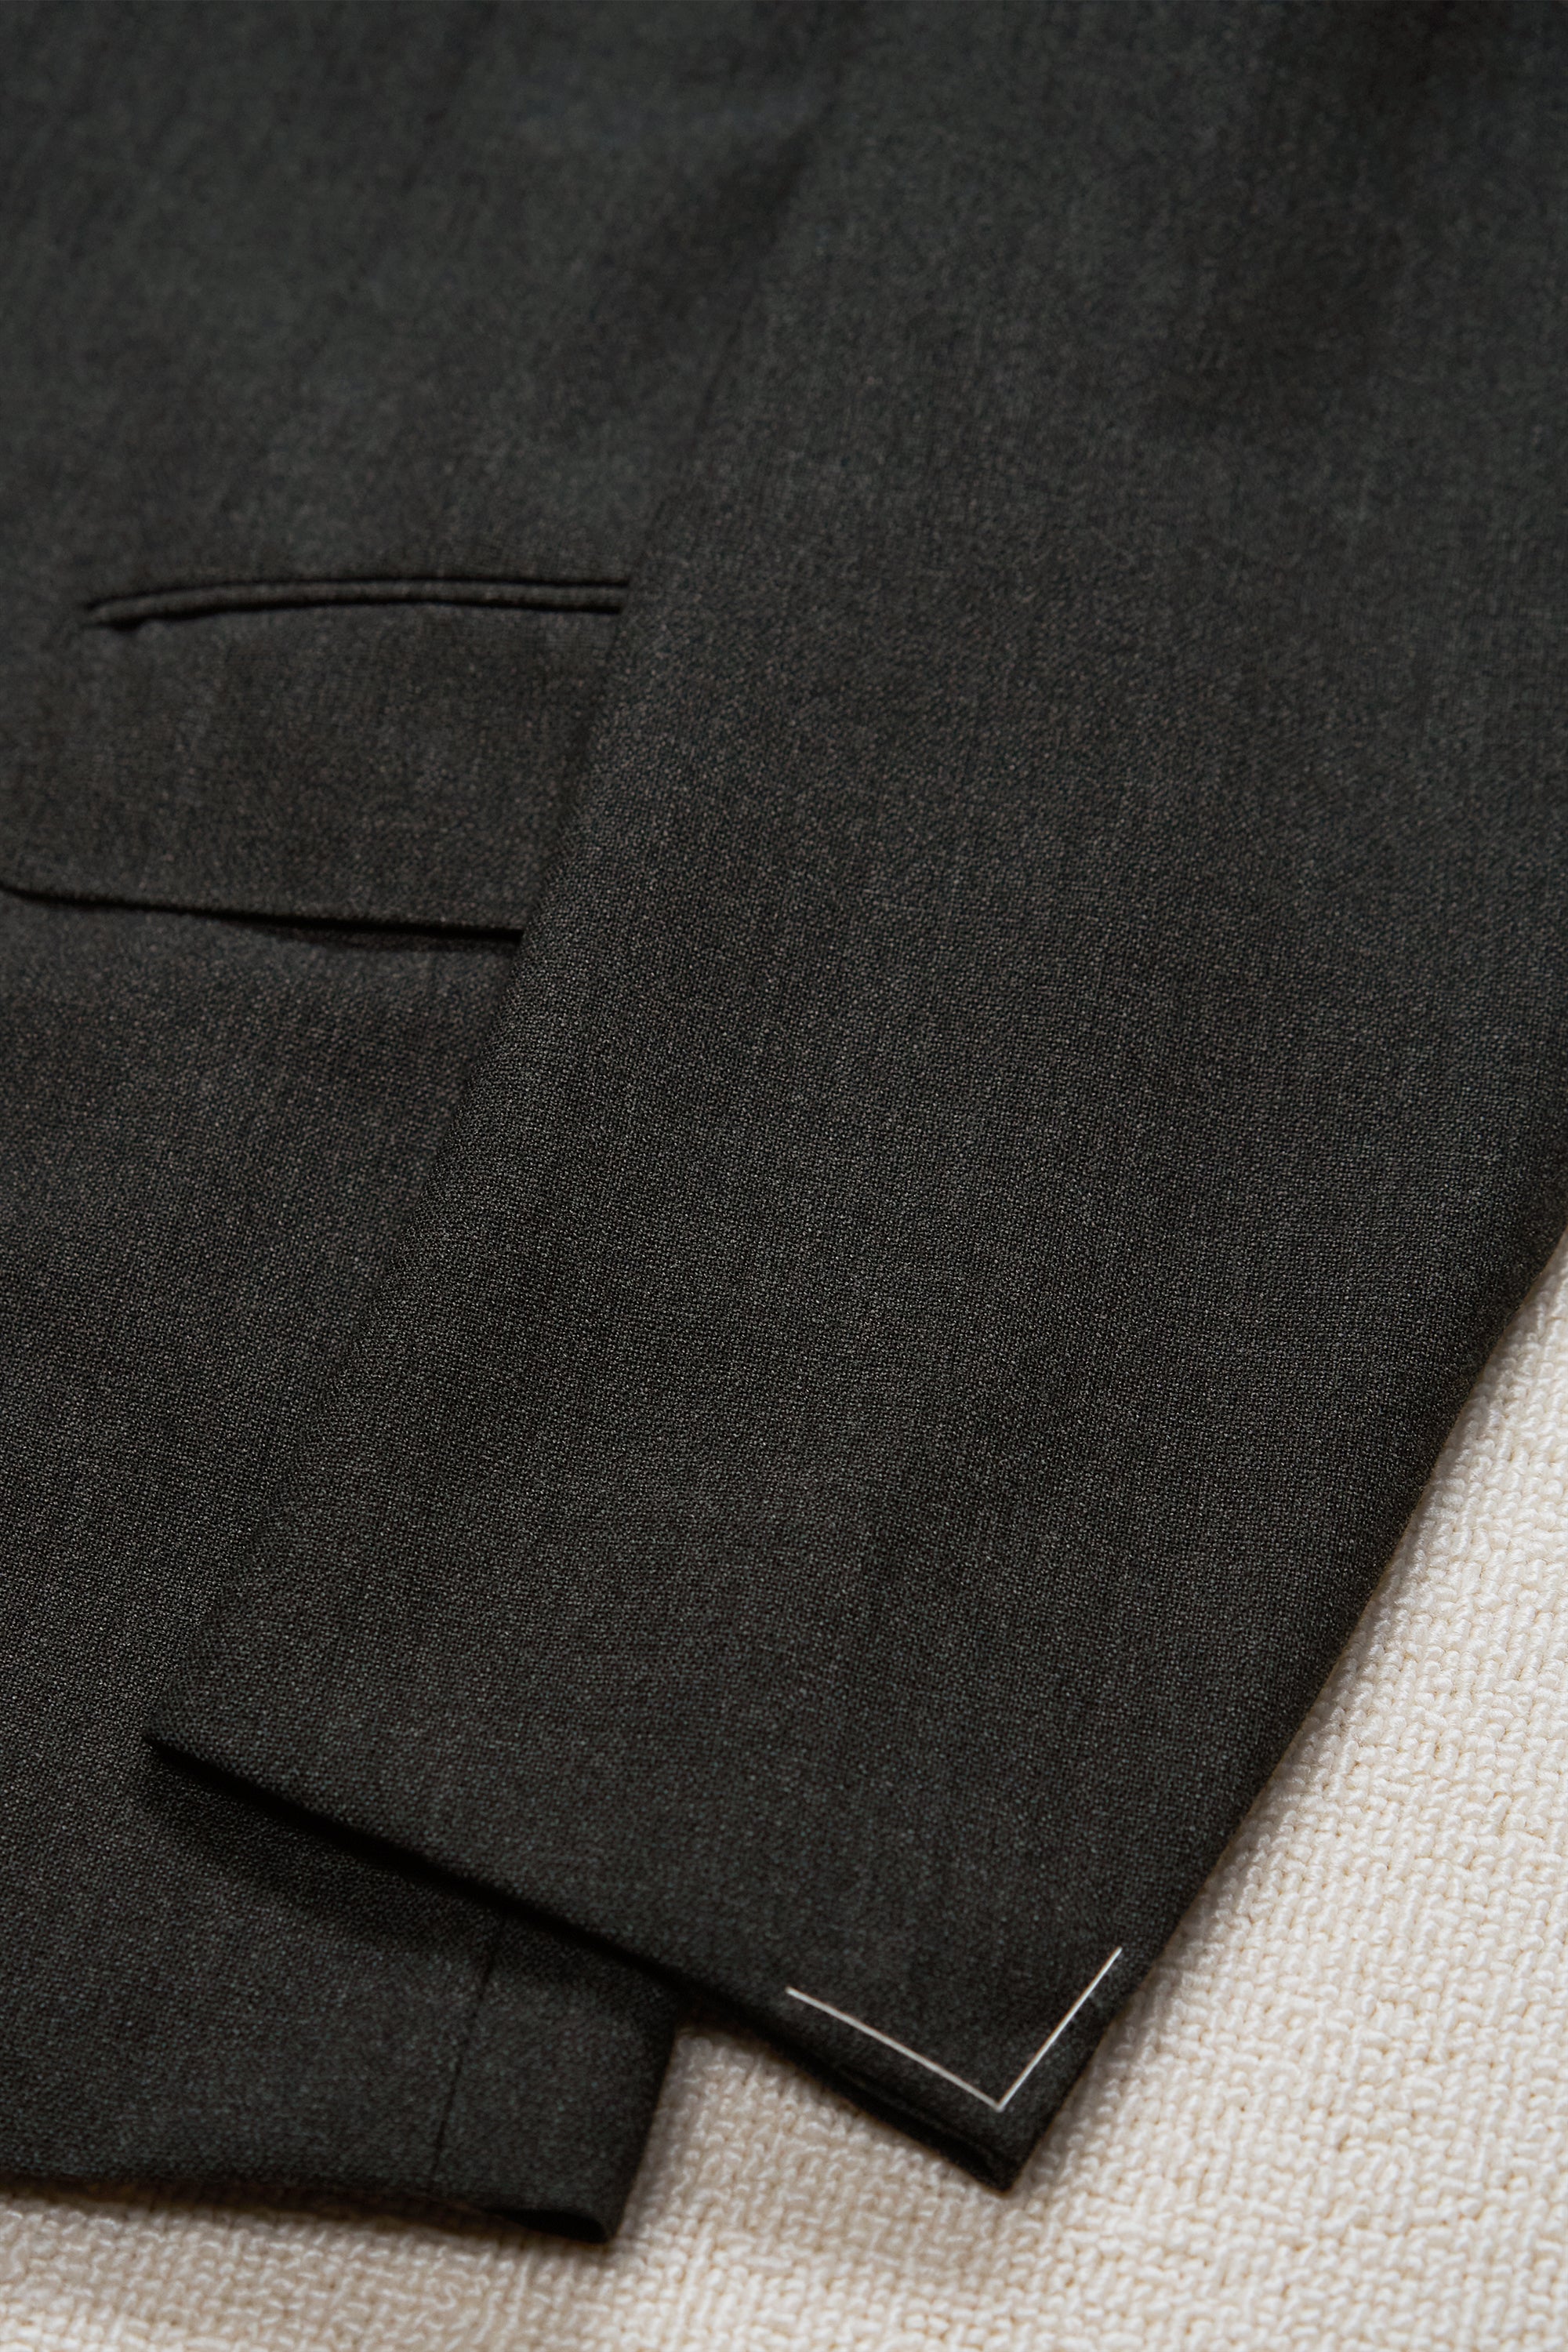 The Armoury by Ring Jacket Model 3A Dark Grey Wool 4-ply Suit